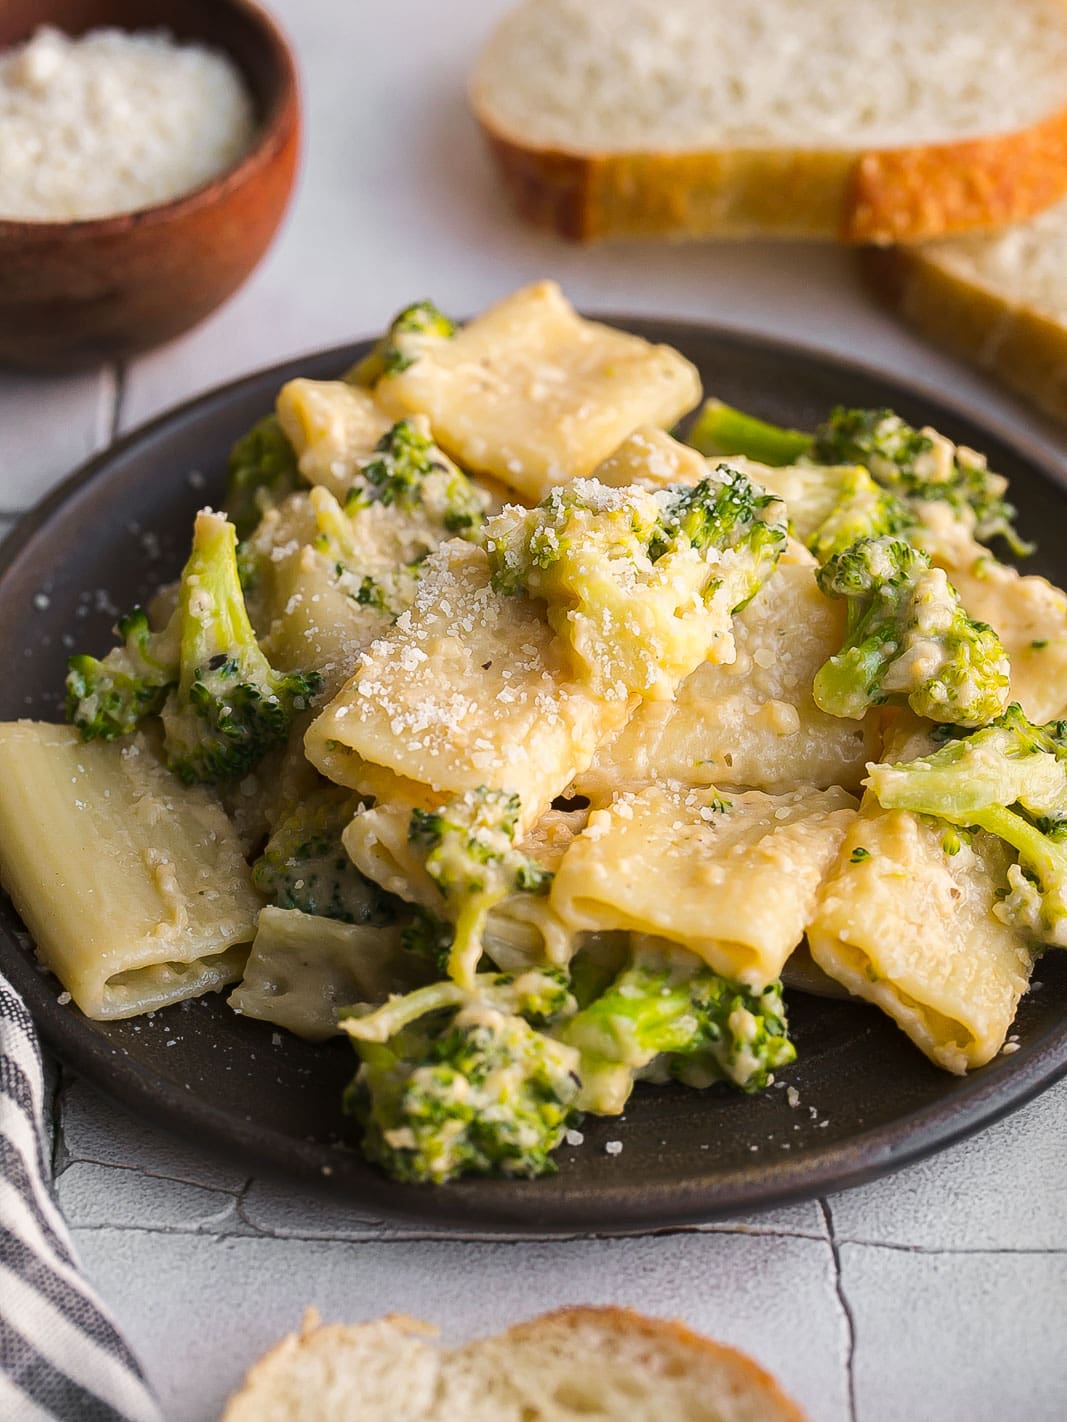 Pasta with cheesy sauce and broccoli florets. 